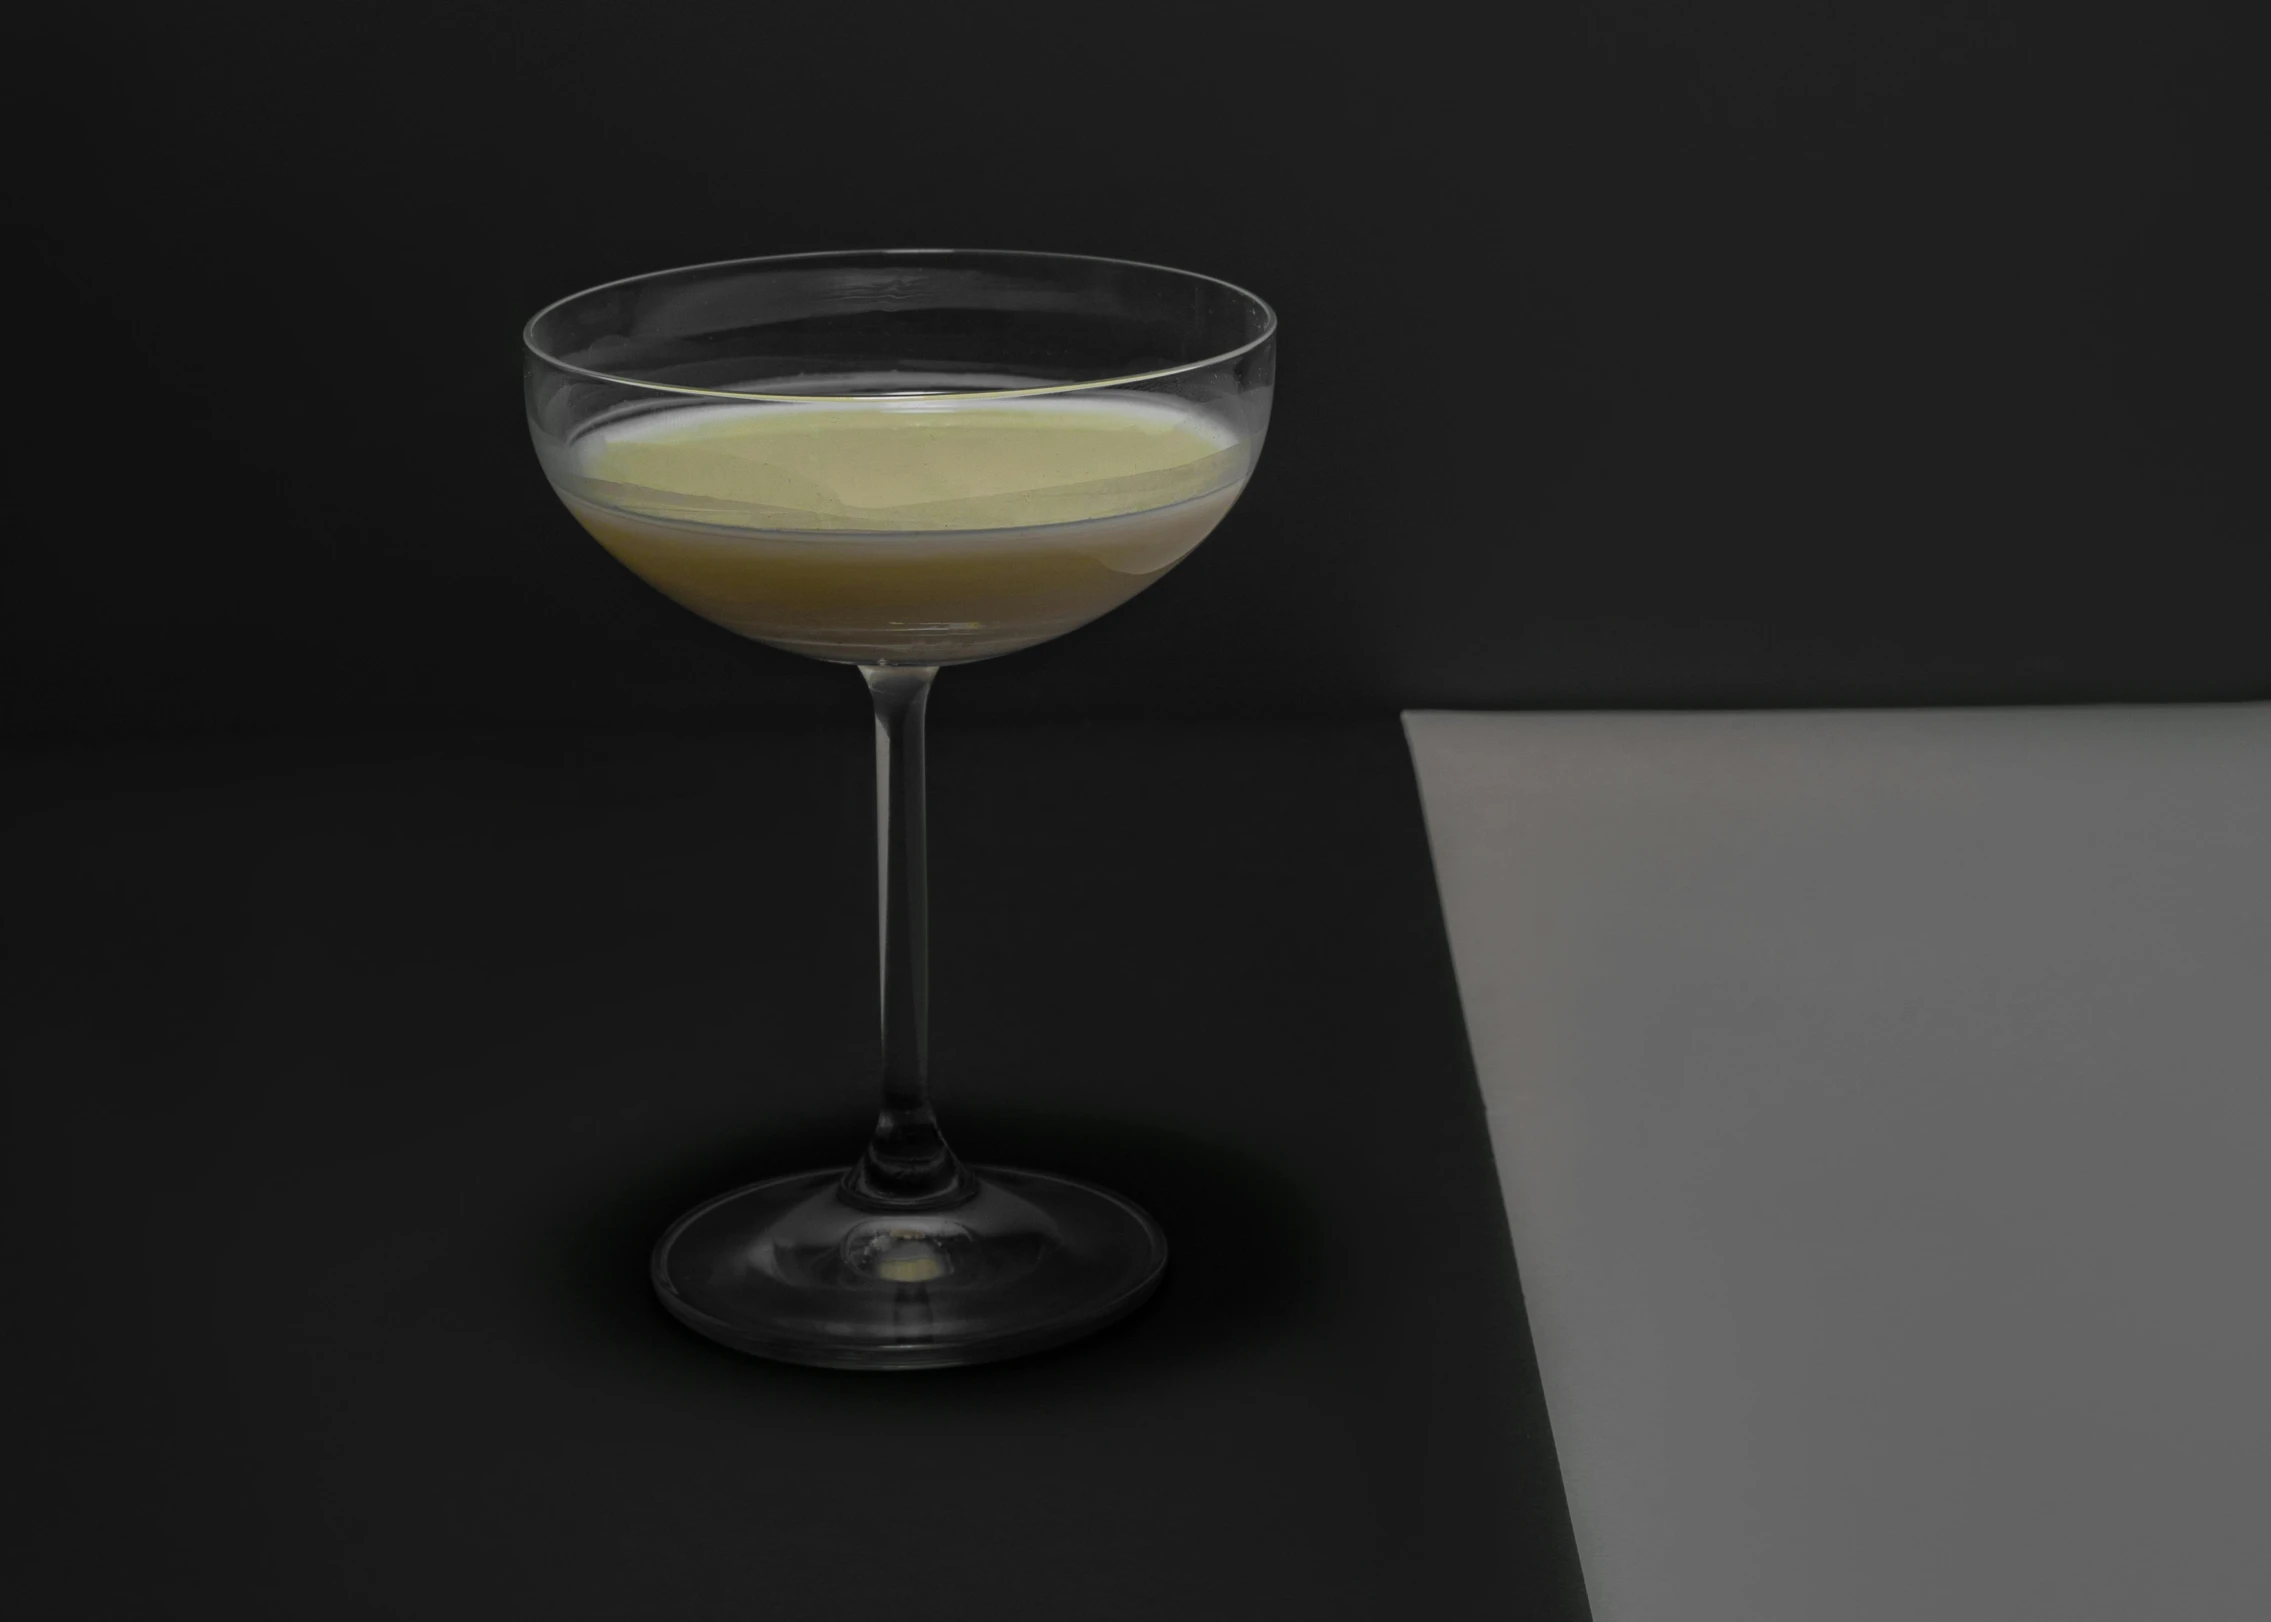 a glass filled with liquid sitting on top of a table, inspired by Ndoc Martini, purism, phosphorescent, beige mist, 2030s, raf grassetti